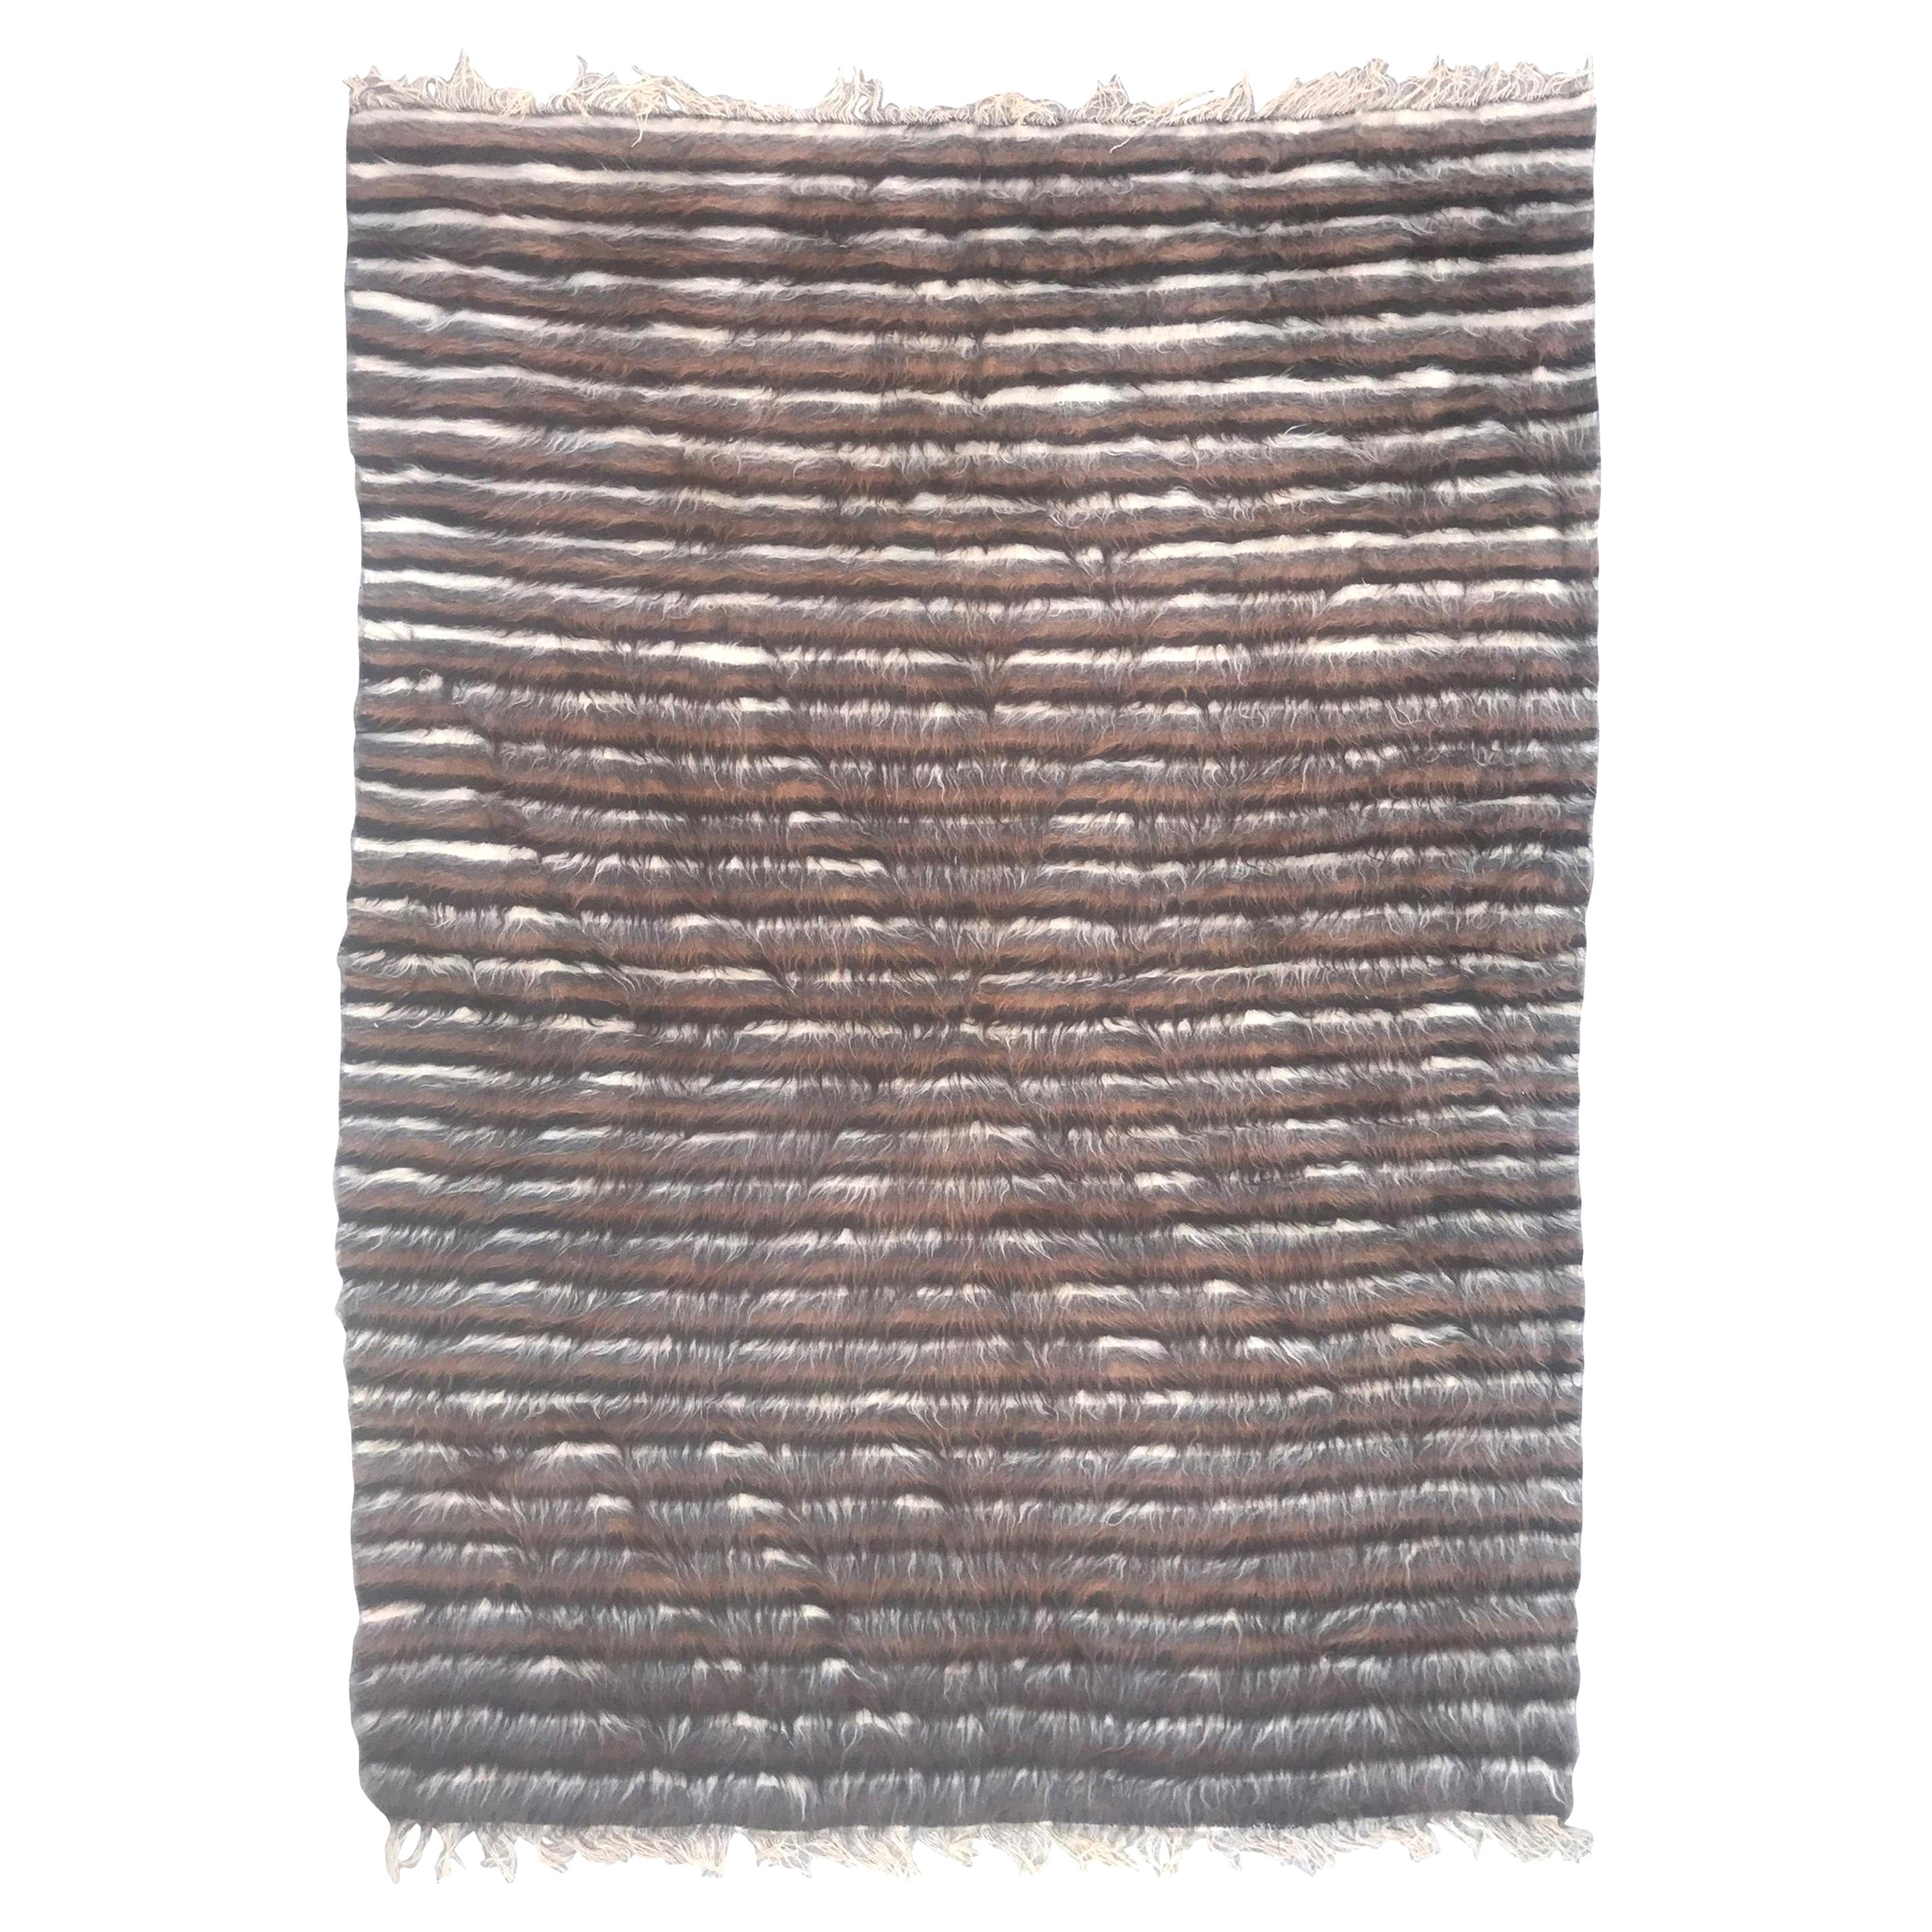 Bobyrug’s Mid-Century Modern Goat Hair Moroccan Rug with Stripes